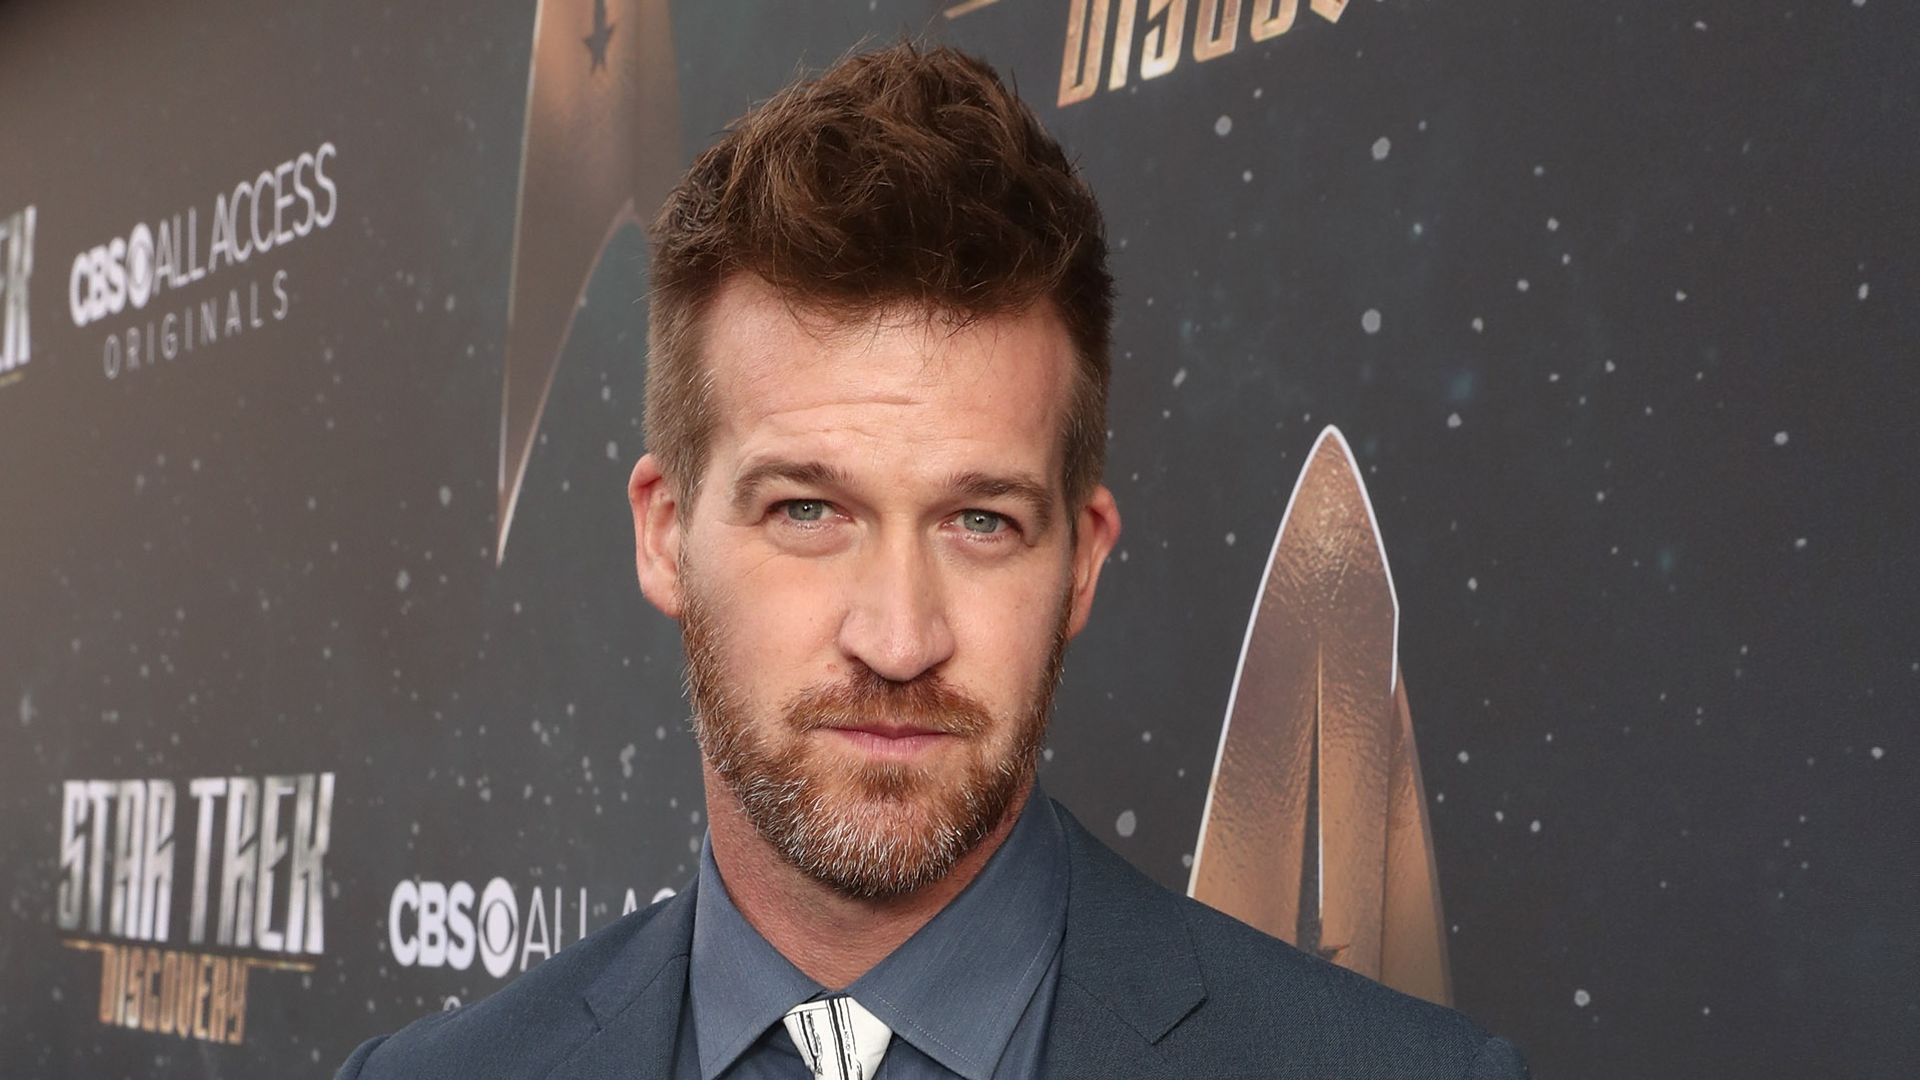 Kenneth Mitchell attends the premiere of CBS's "Star Trek: Discovery" at The Cinerama Dome on September 19, 2017 in Los Angeles, California.